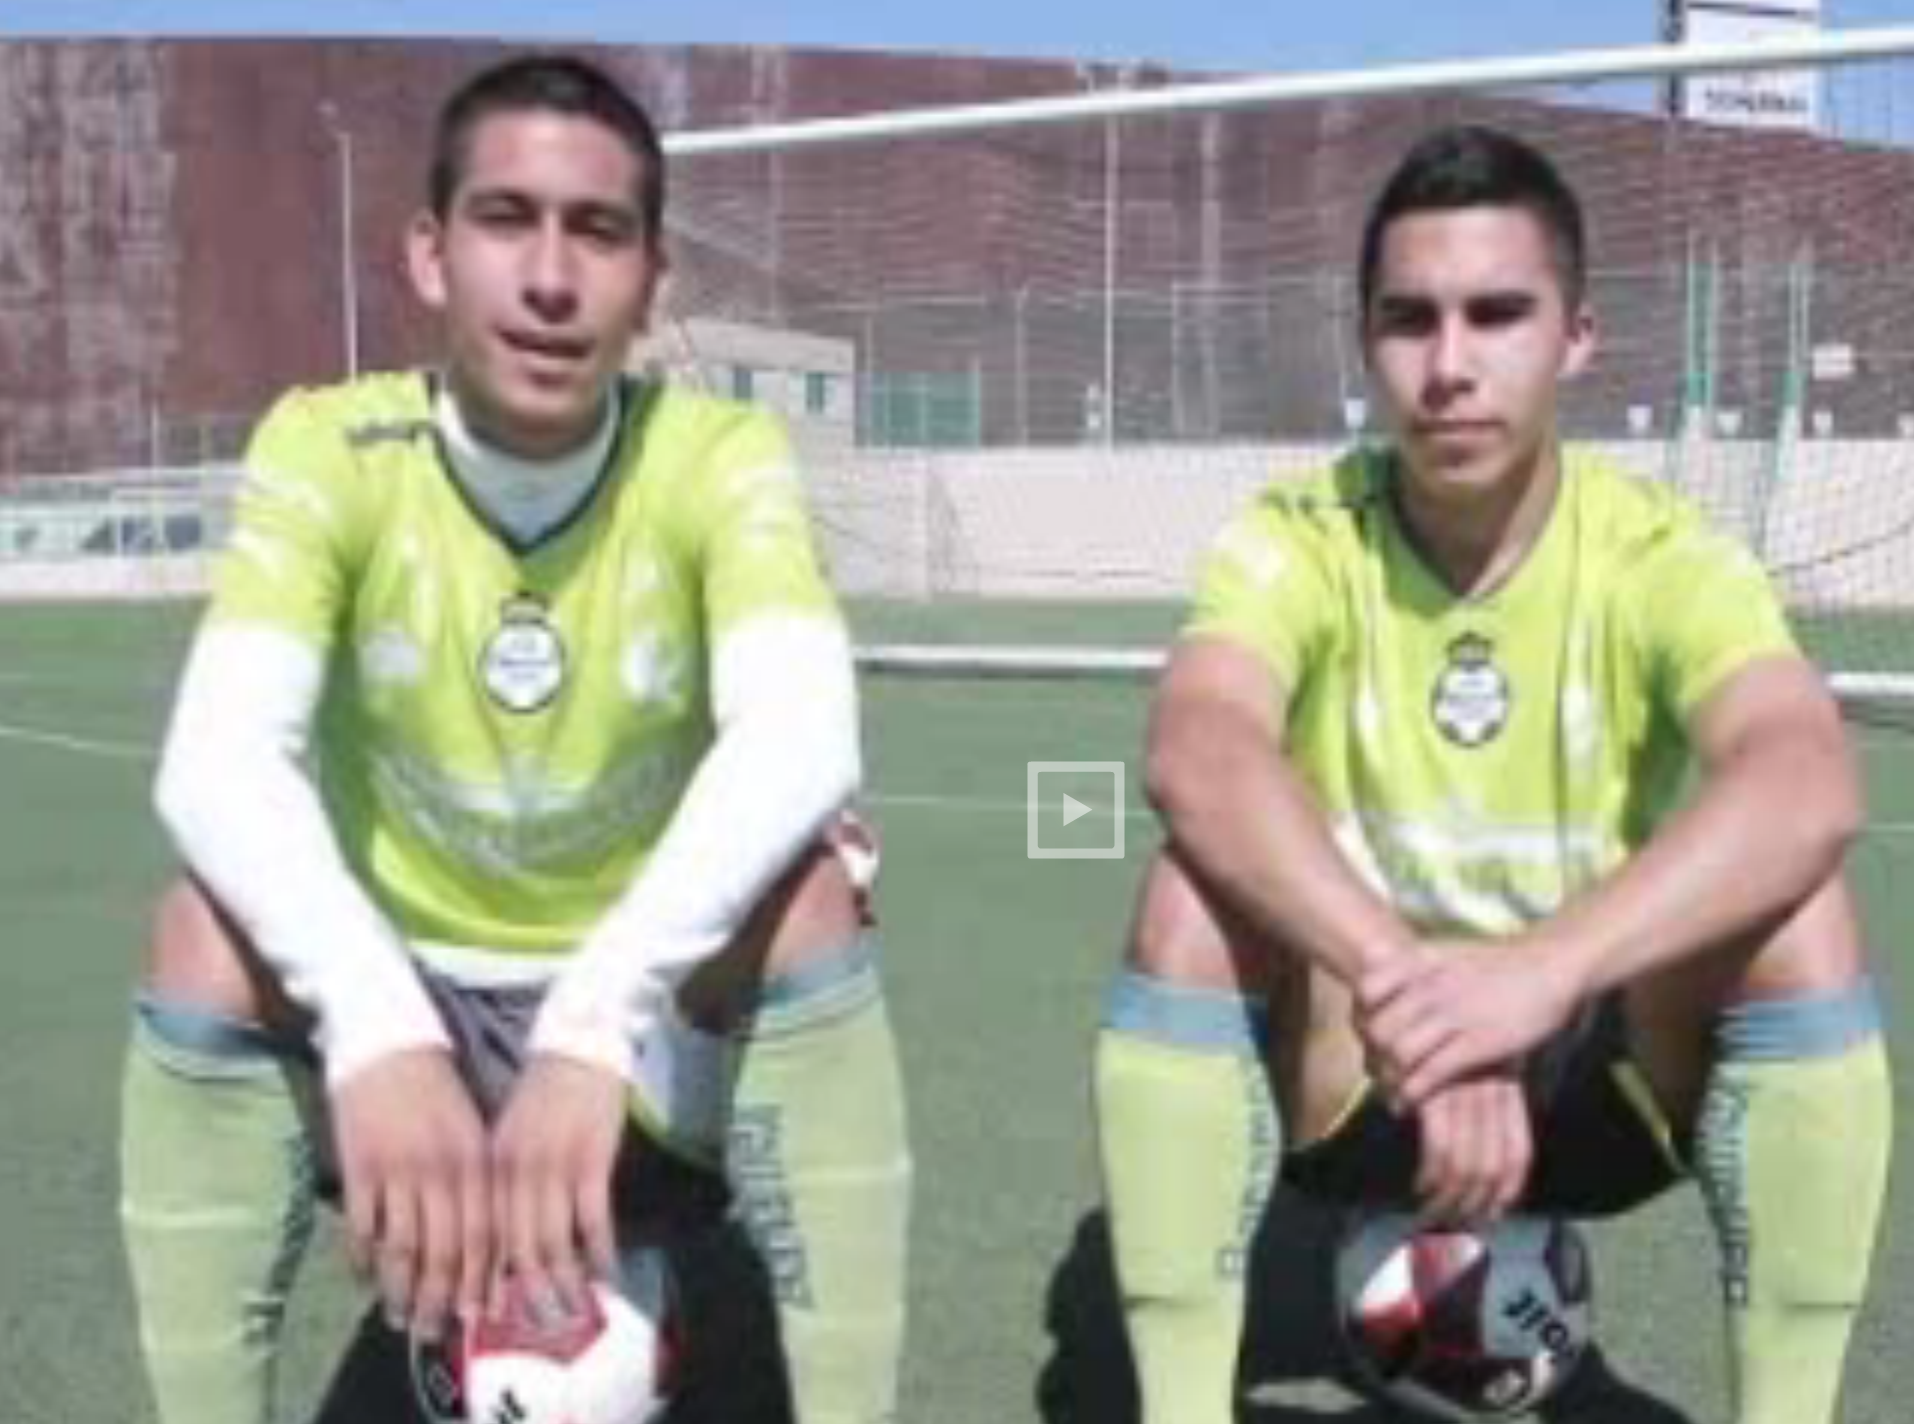 Video – From the US  to México to triumph in Soccer (En Espanol)